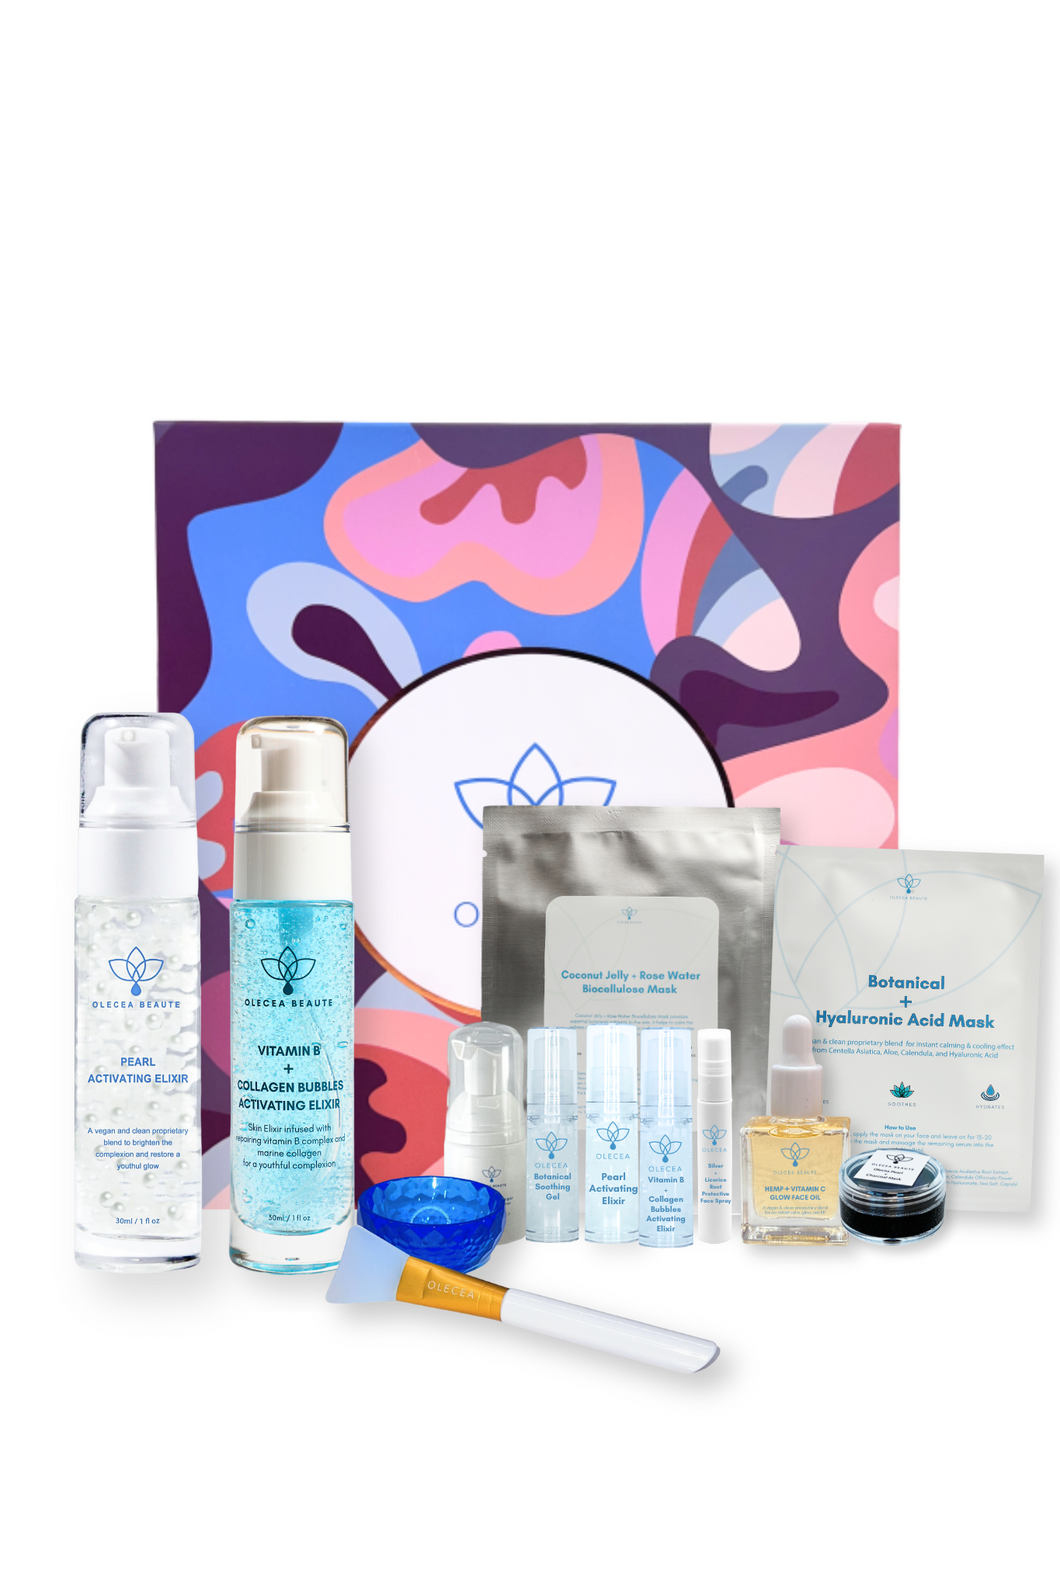 Olecea Mother's Day Radiance Box